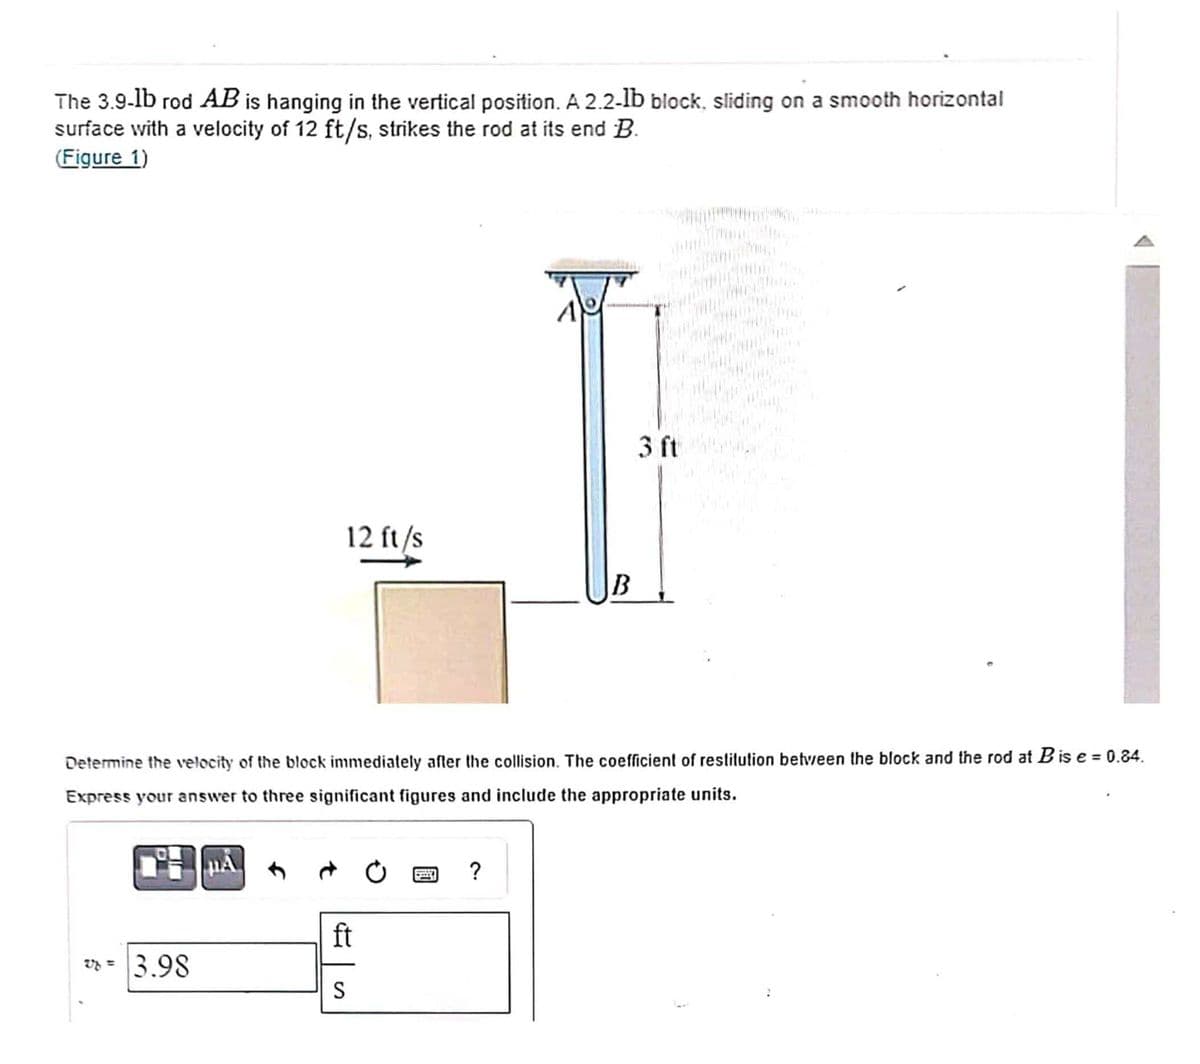 The 3.9-lb rod AB is hanging in the vertical position. A 2.2-lb block, sliding on a smooth horizontal
surface with a velocity of 12 ft/s, strikes the rod at its end B.
(Figure 1)
3.98
12 ft/s
PA
ft
S
A
Determine the velocity of the block immediately after the collision. The coefficient of restitution between the block and the rod at B is e = 0.84.
Express your answer to three significant figures and include the appropriate units.
?
B
C
3 ft
form Cyc
HEALT
way